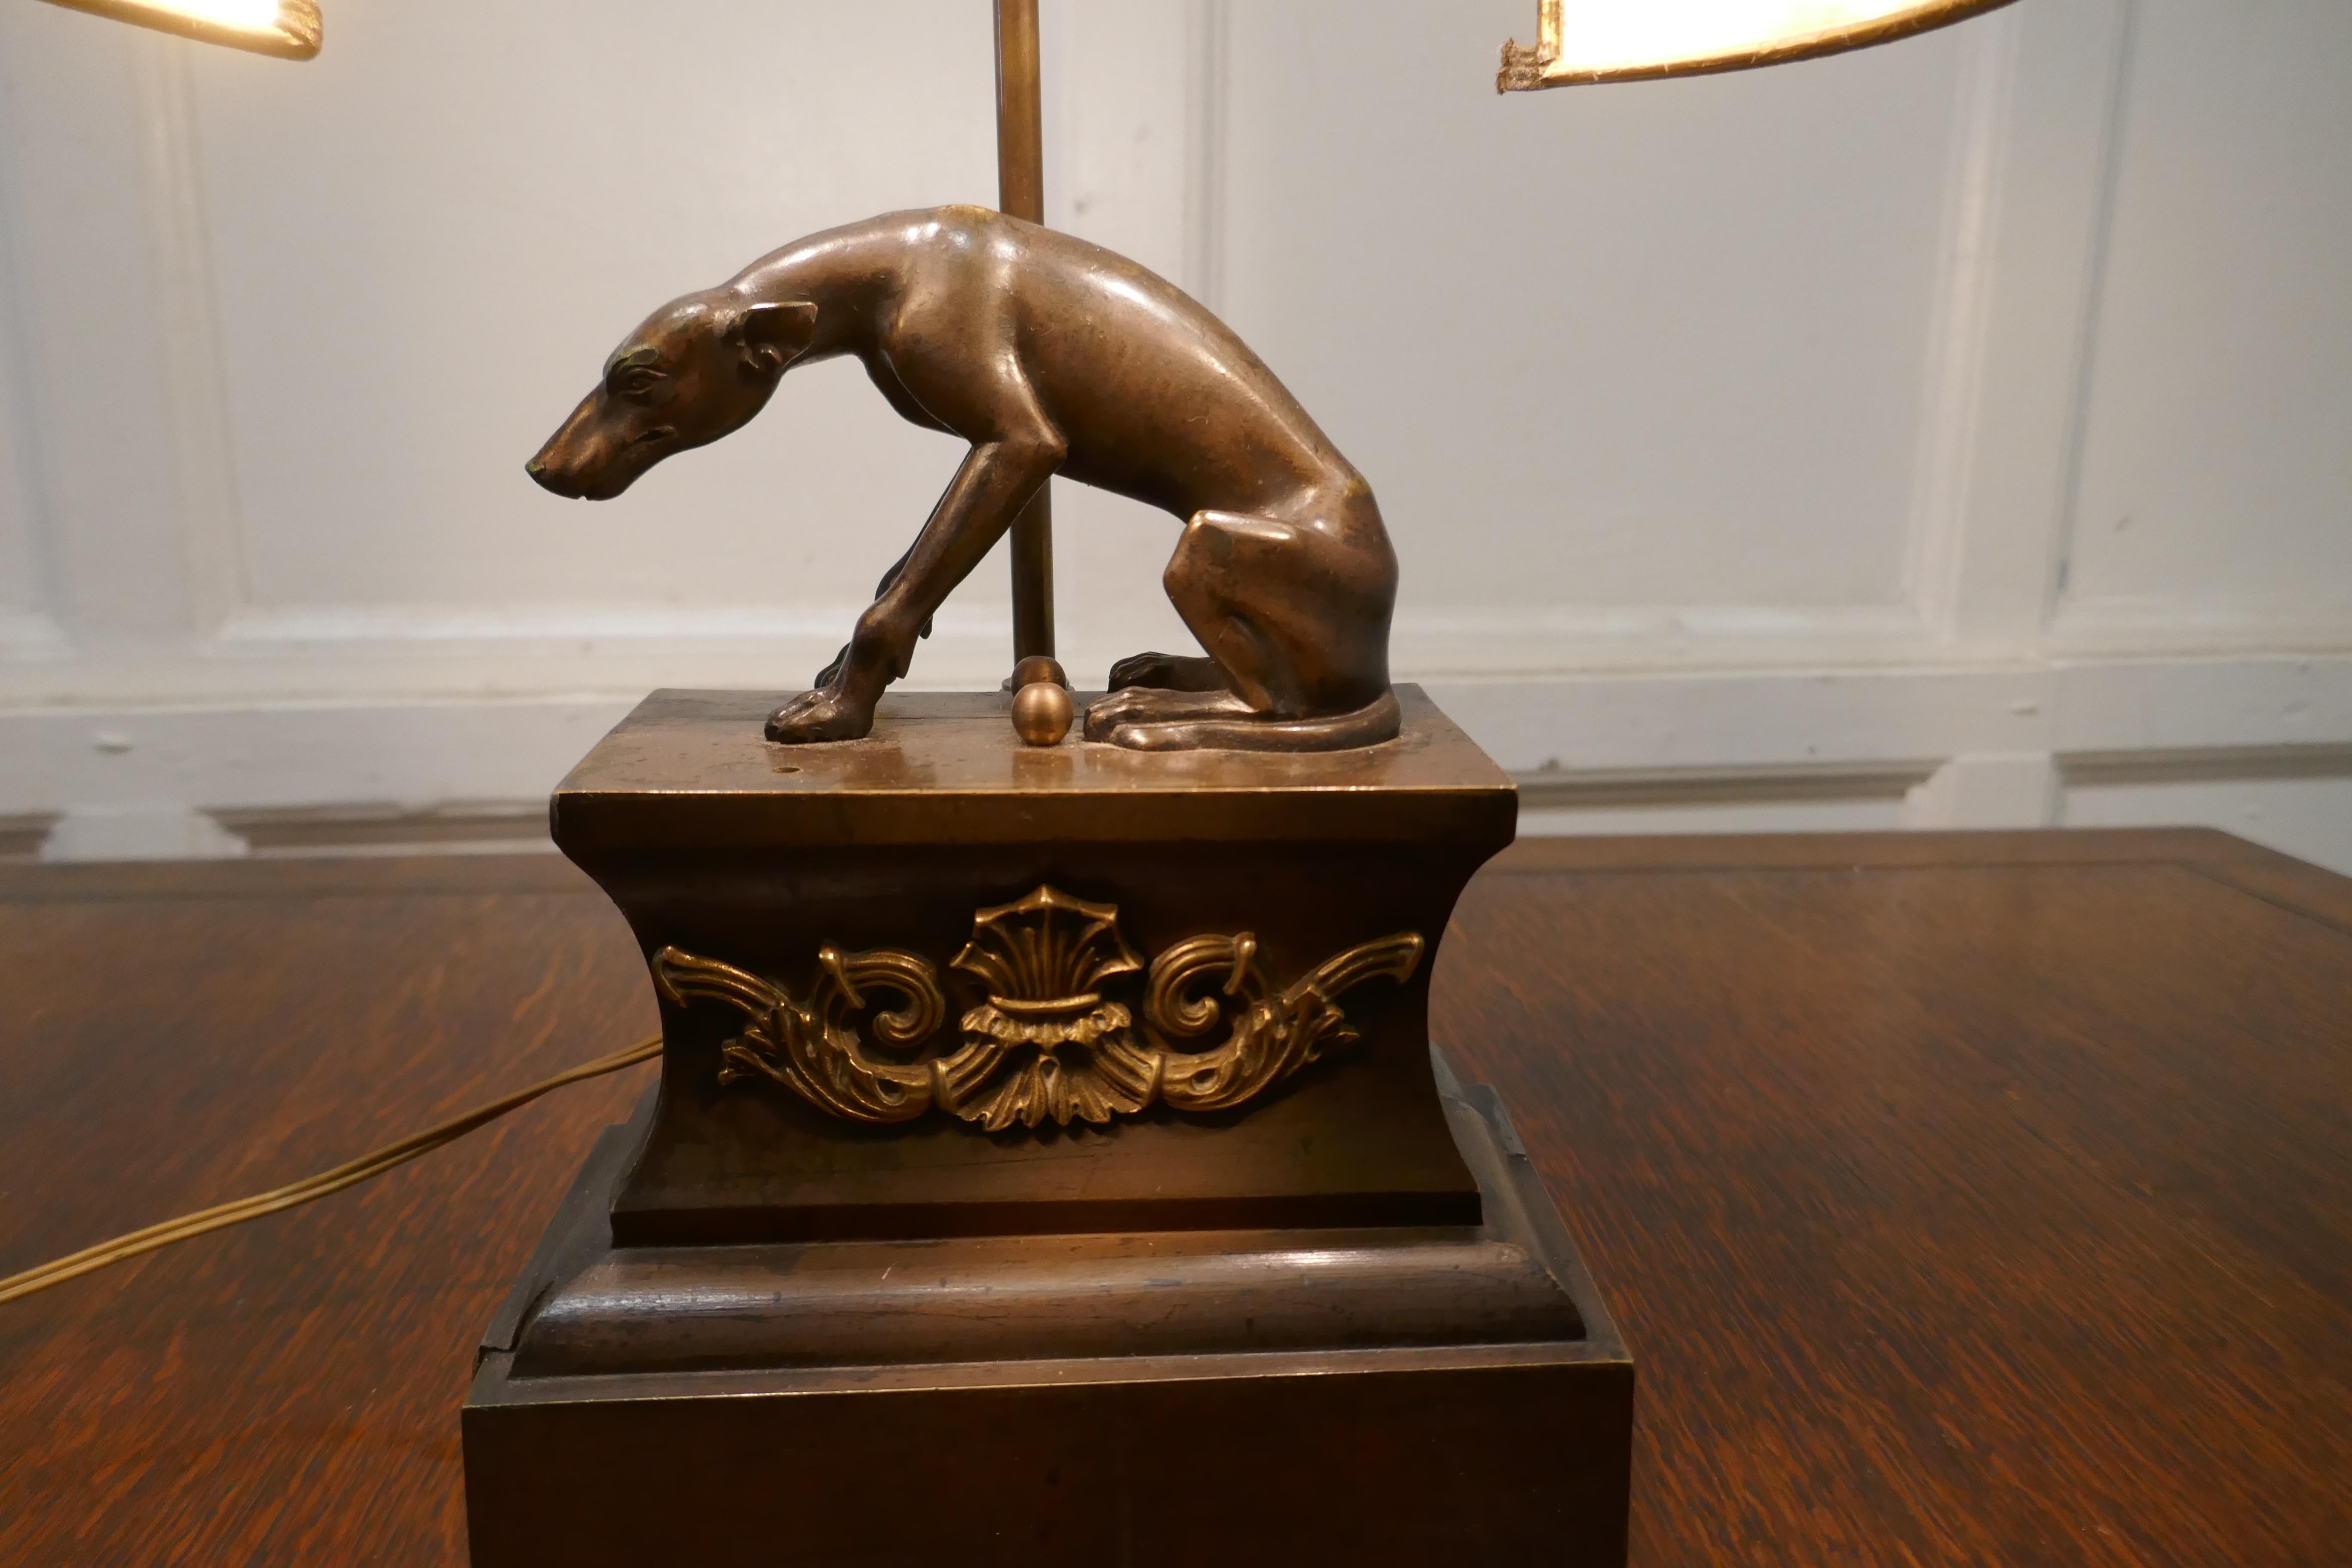 French brass greyhound statue lamp

A handsome piece made in Brass and Iron with a bronzed finish to the dog
3 Dimensional and looks great from all sides, the shade of this lamp has a metal look, it is parchment 
The Lamp is 17” high, 13” long